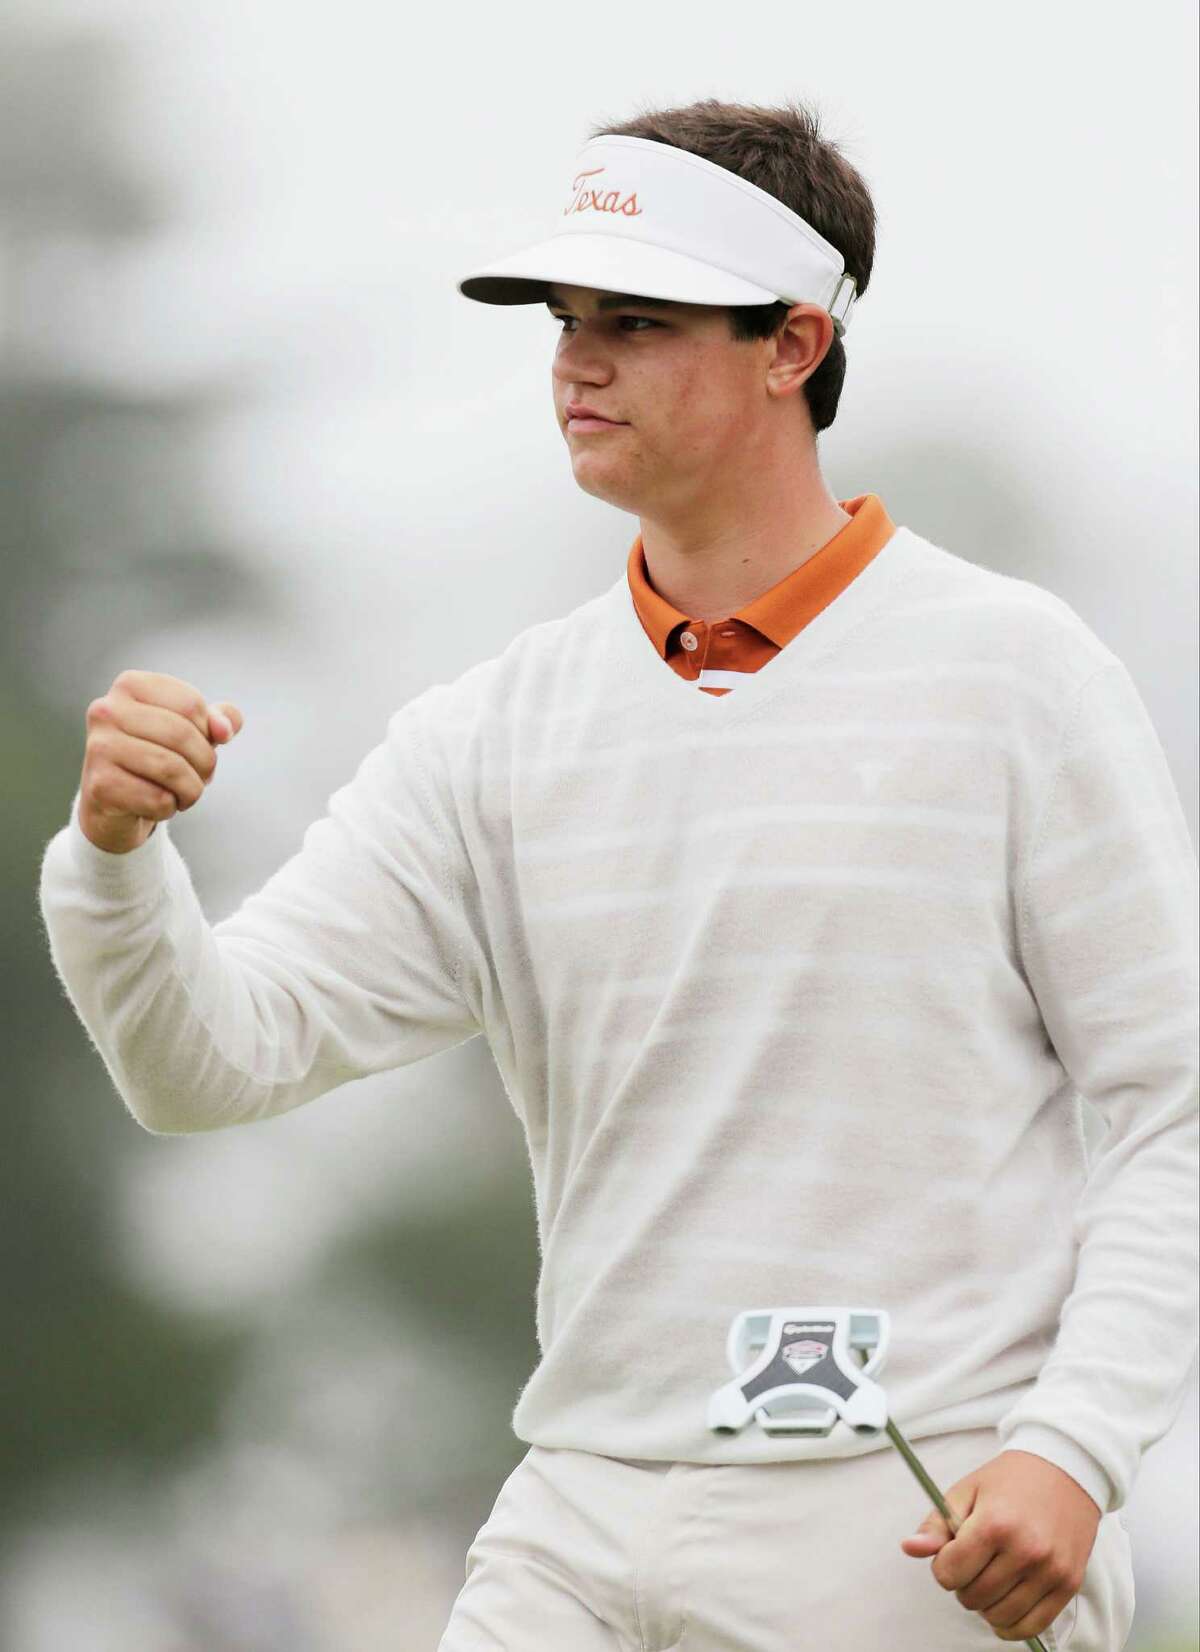 Amateur Beau Hossler reacts after chipping in to save par on the first hole during the fourth round of the U.S. Open Championship golf tournament Sunday, June 17, 2012, at The Olympic Club in San Francisco. (AP Photo/Eric Gay)